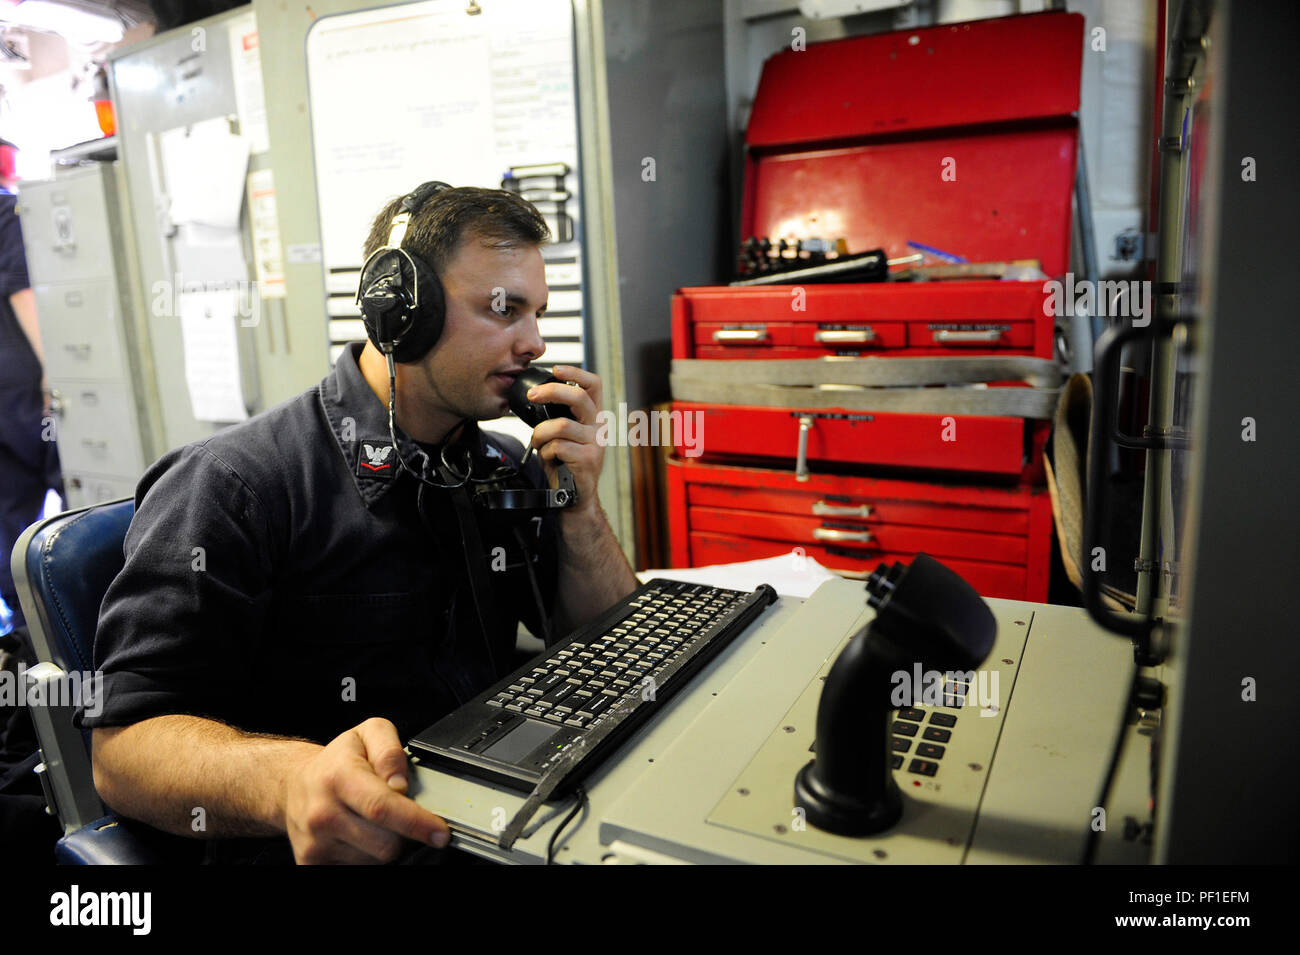 160226-N-VD165-061 PACIFIC OCEAN (Feb. 26, 2016) Fire Controlman 3rd Class Carmen Morganti communicates with a remote control station operator in the combat information center prior to a phalanx close-in weapons system live-fire exercise aboard amphibious assault ship USS Boxer (LHD 4). More than 4,500 Sailors and Marines from Boxer Amphibious Ready Group, 13th Marine Expeditionary Unit (13th MEU) team are currently transiting the Pacific Ocean toward the U.S 7th Fleet area of operations during a scheduled deployment. (U.S. Navy photo by Mass Communication Specialist 2nd Class Jose Jaen/Releas Stock Photo